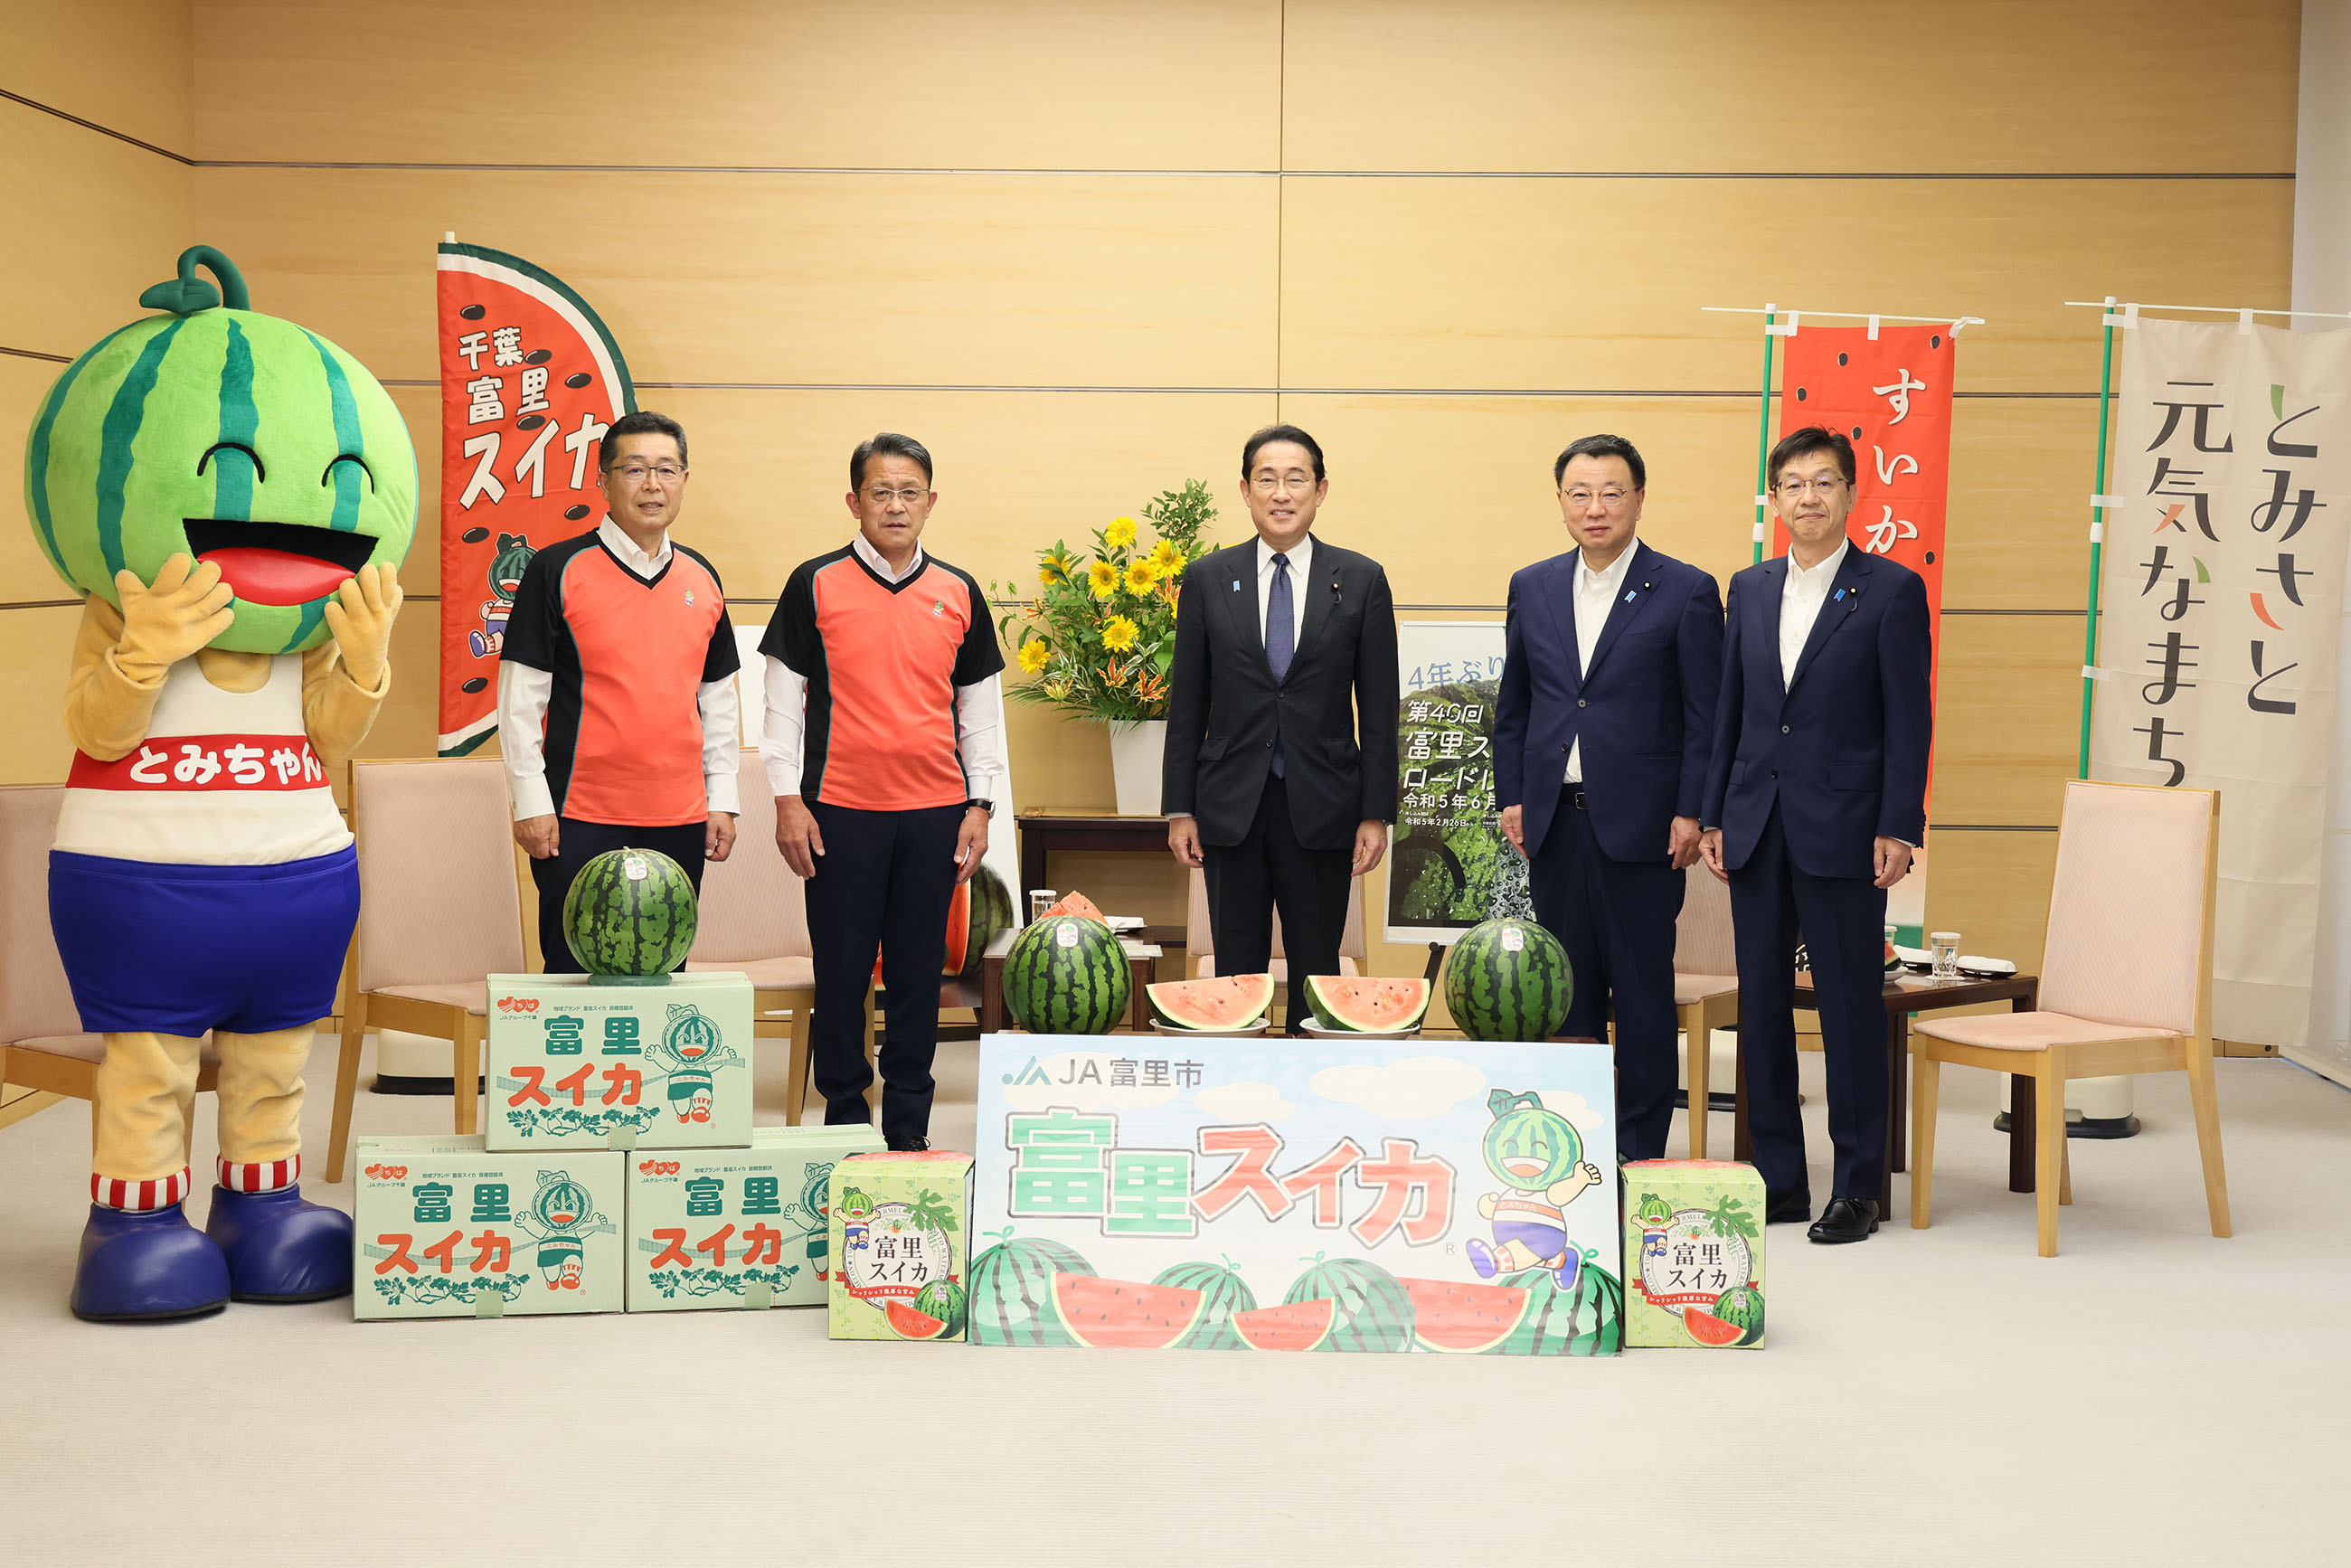 Prime Minister Kishida being presented with watermelons (2)